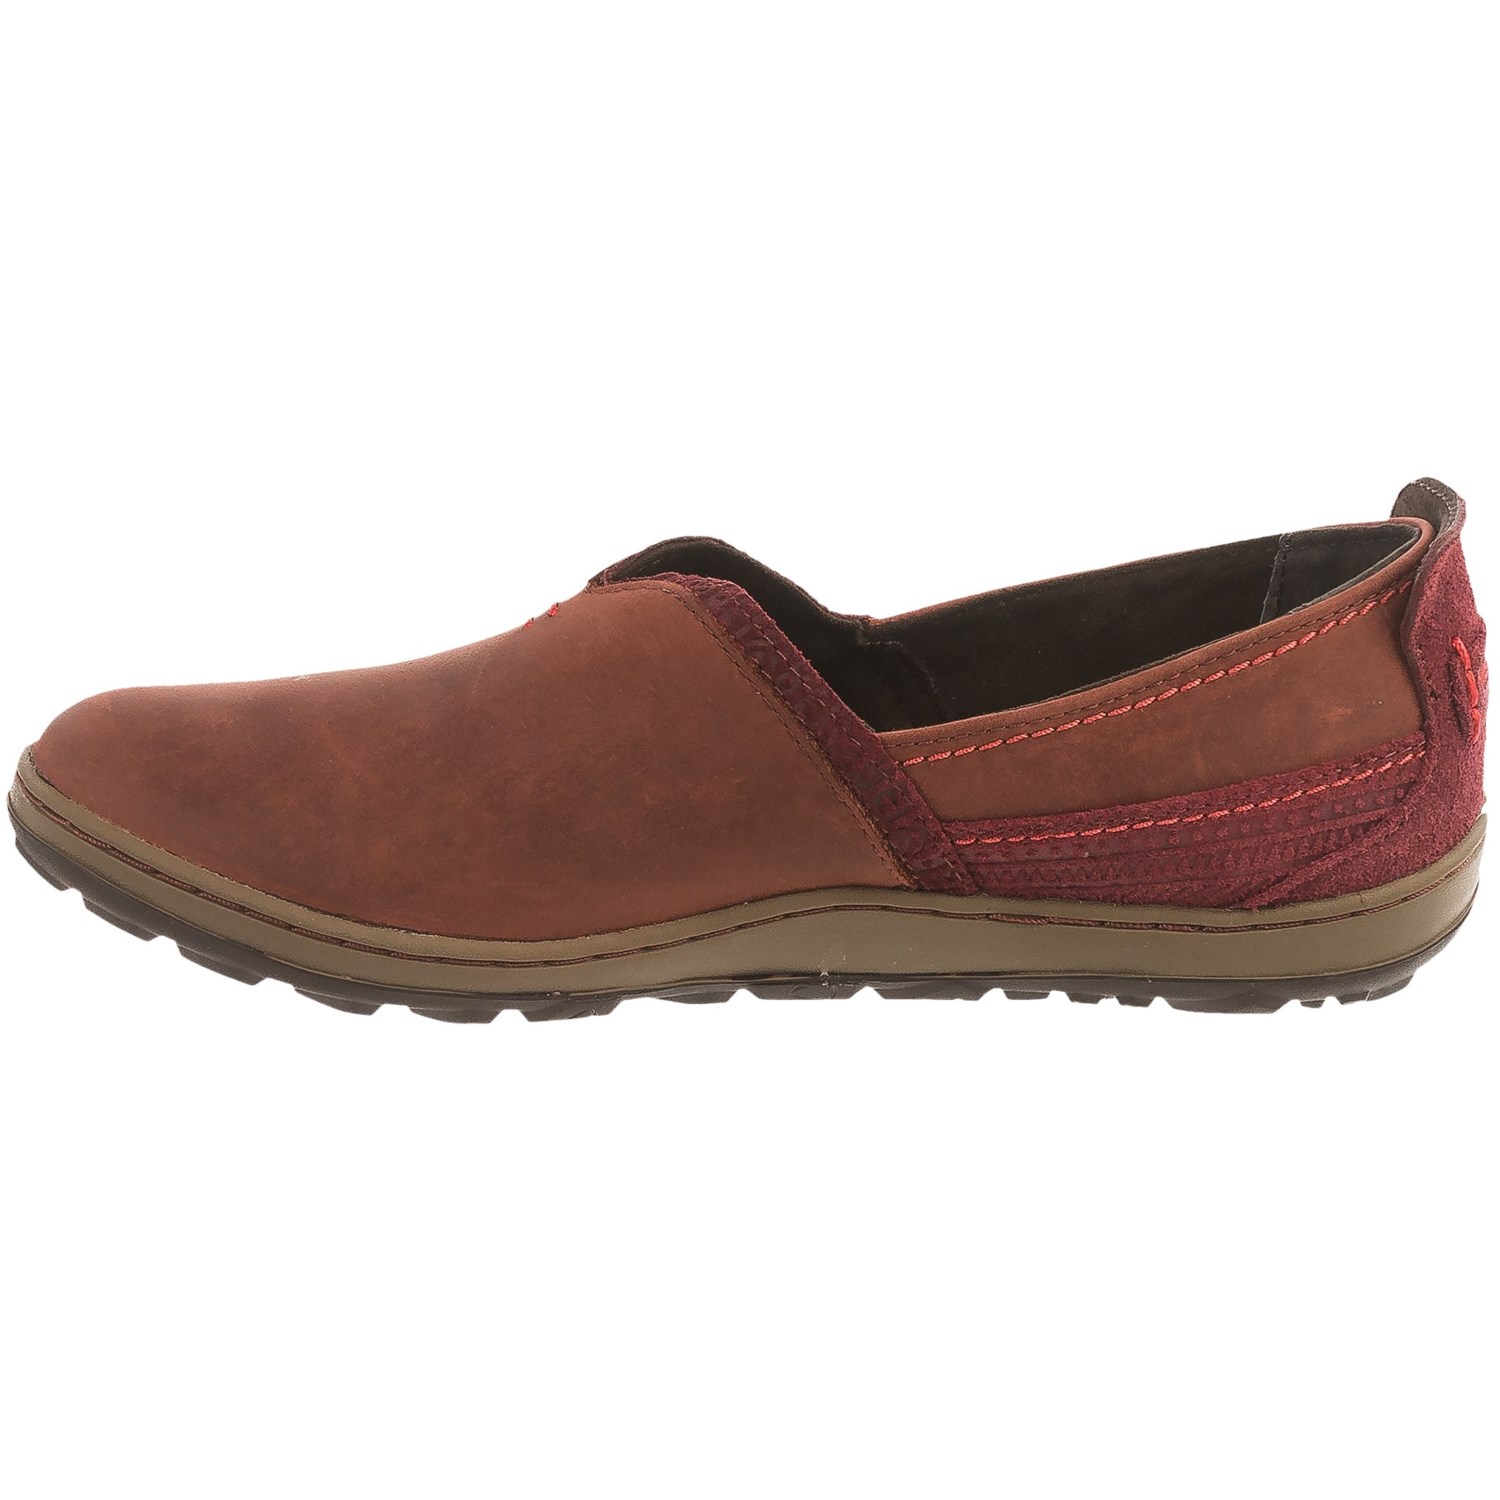 Merrell Ashland Leather Shoes (For Women) - Save 69%